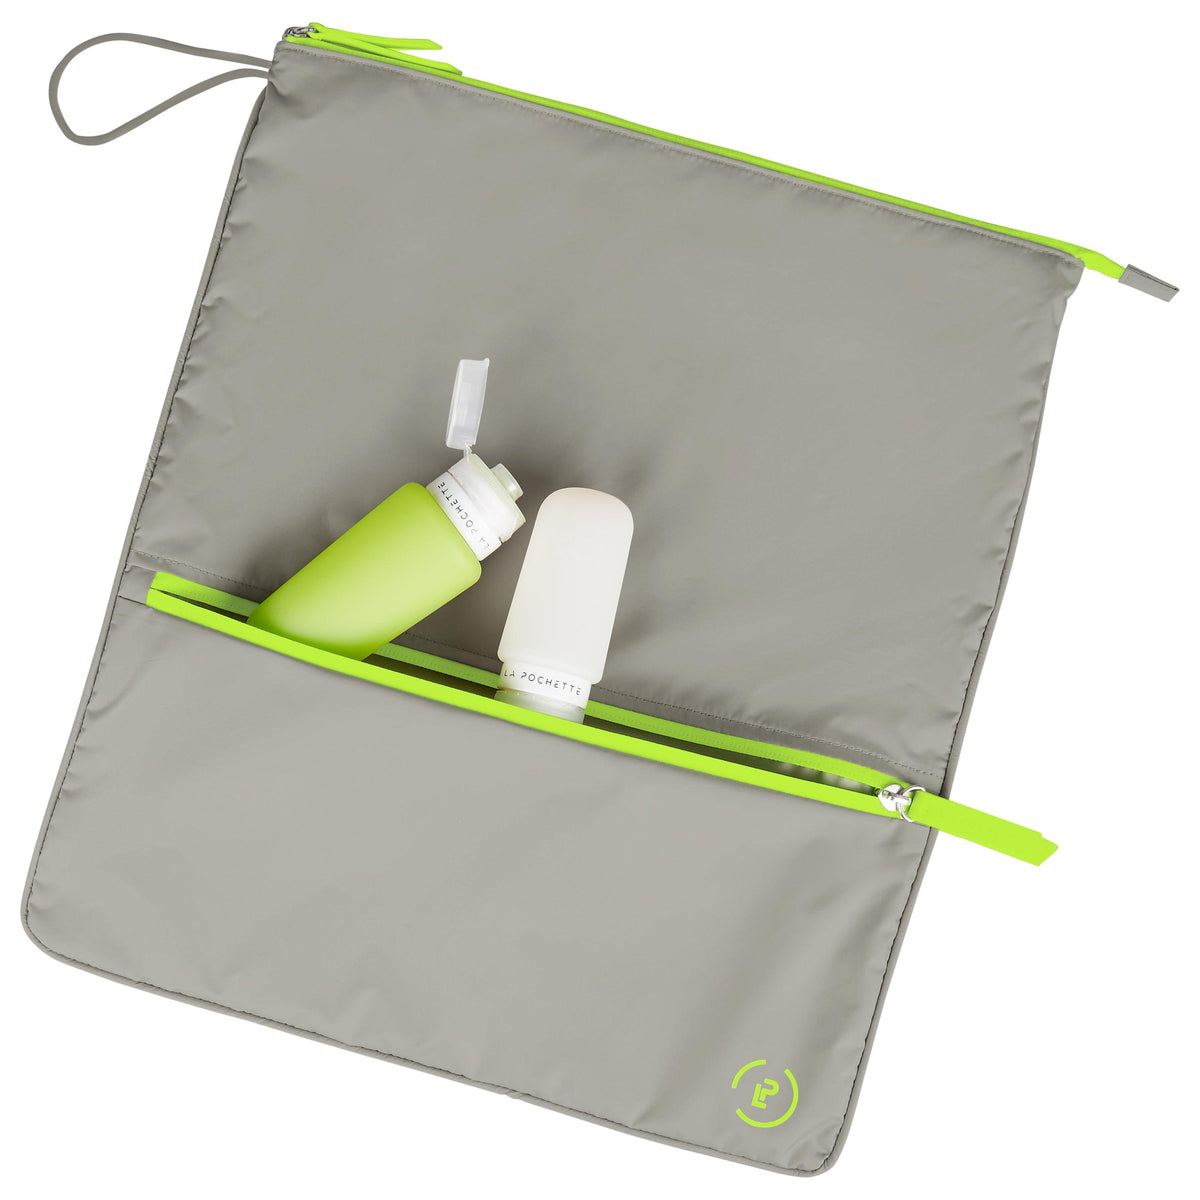 Walnut Neon Green Sweat Bag, shown flat and with two La Pochette silicone travel bottles resting on top and in front pocket